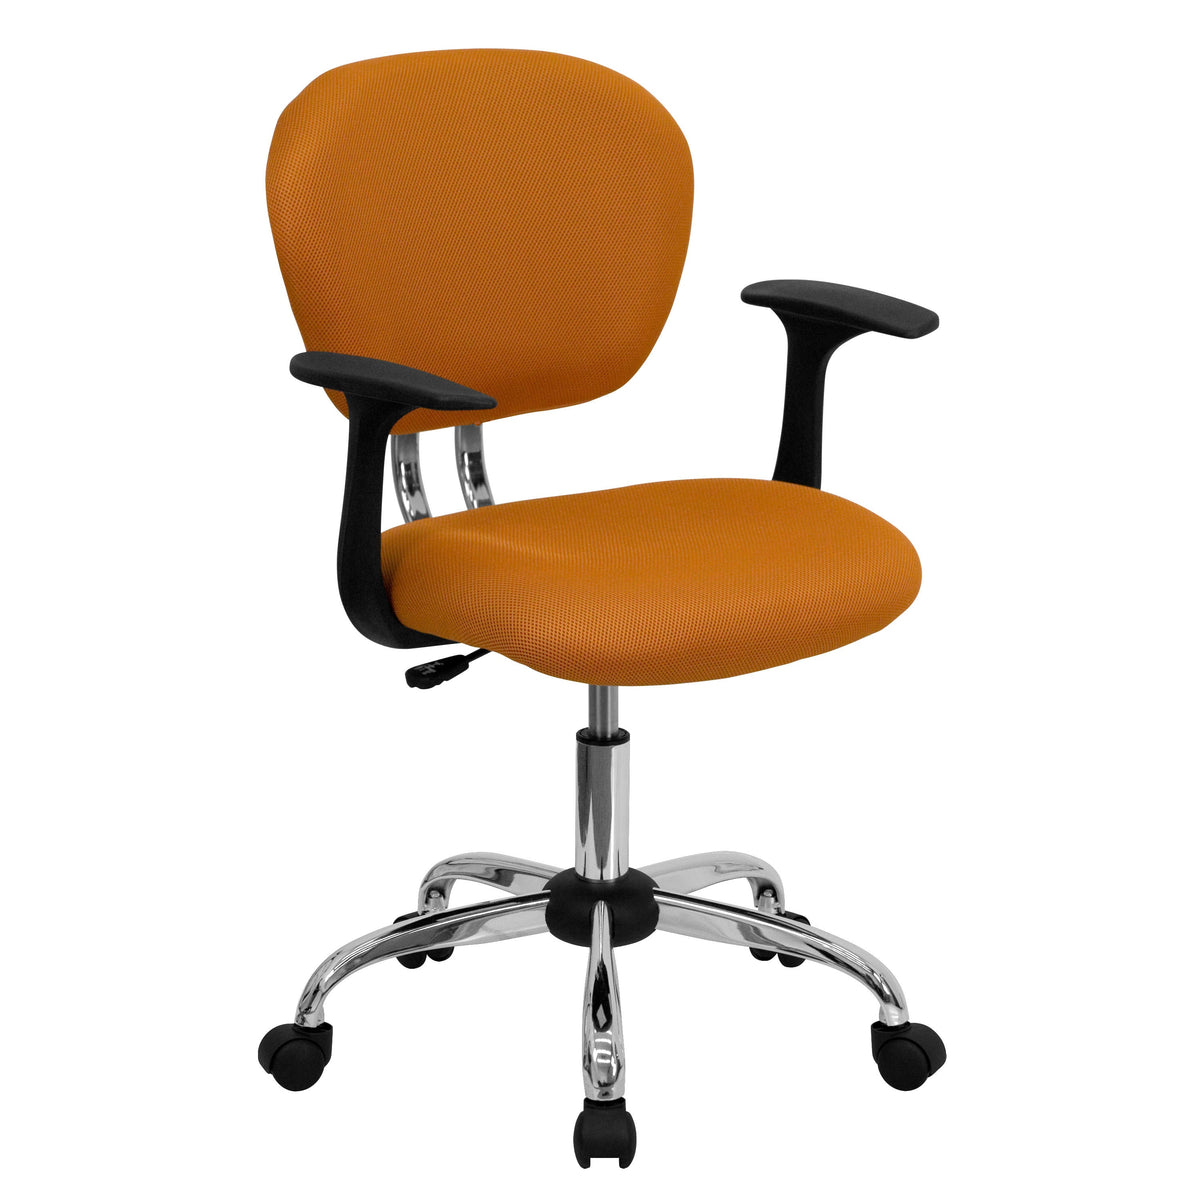 Orange |#| Mid-Back Orange Mesh Padded Swivel Task Office Chair with Chrome Base and Arms